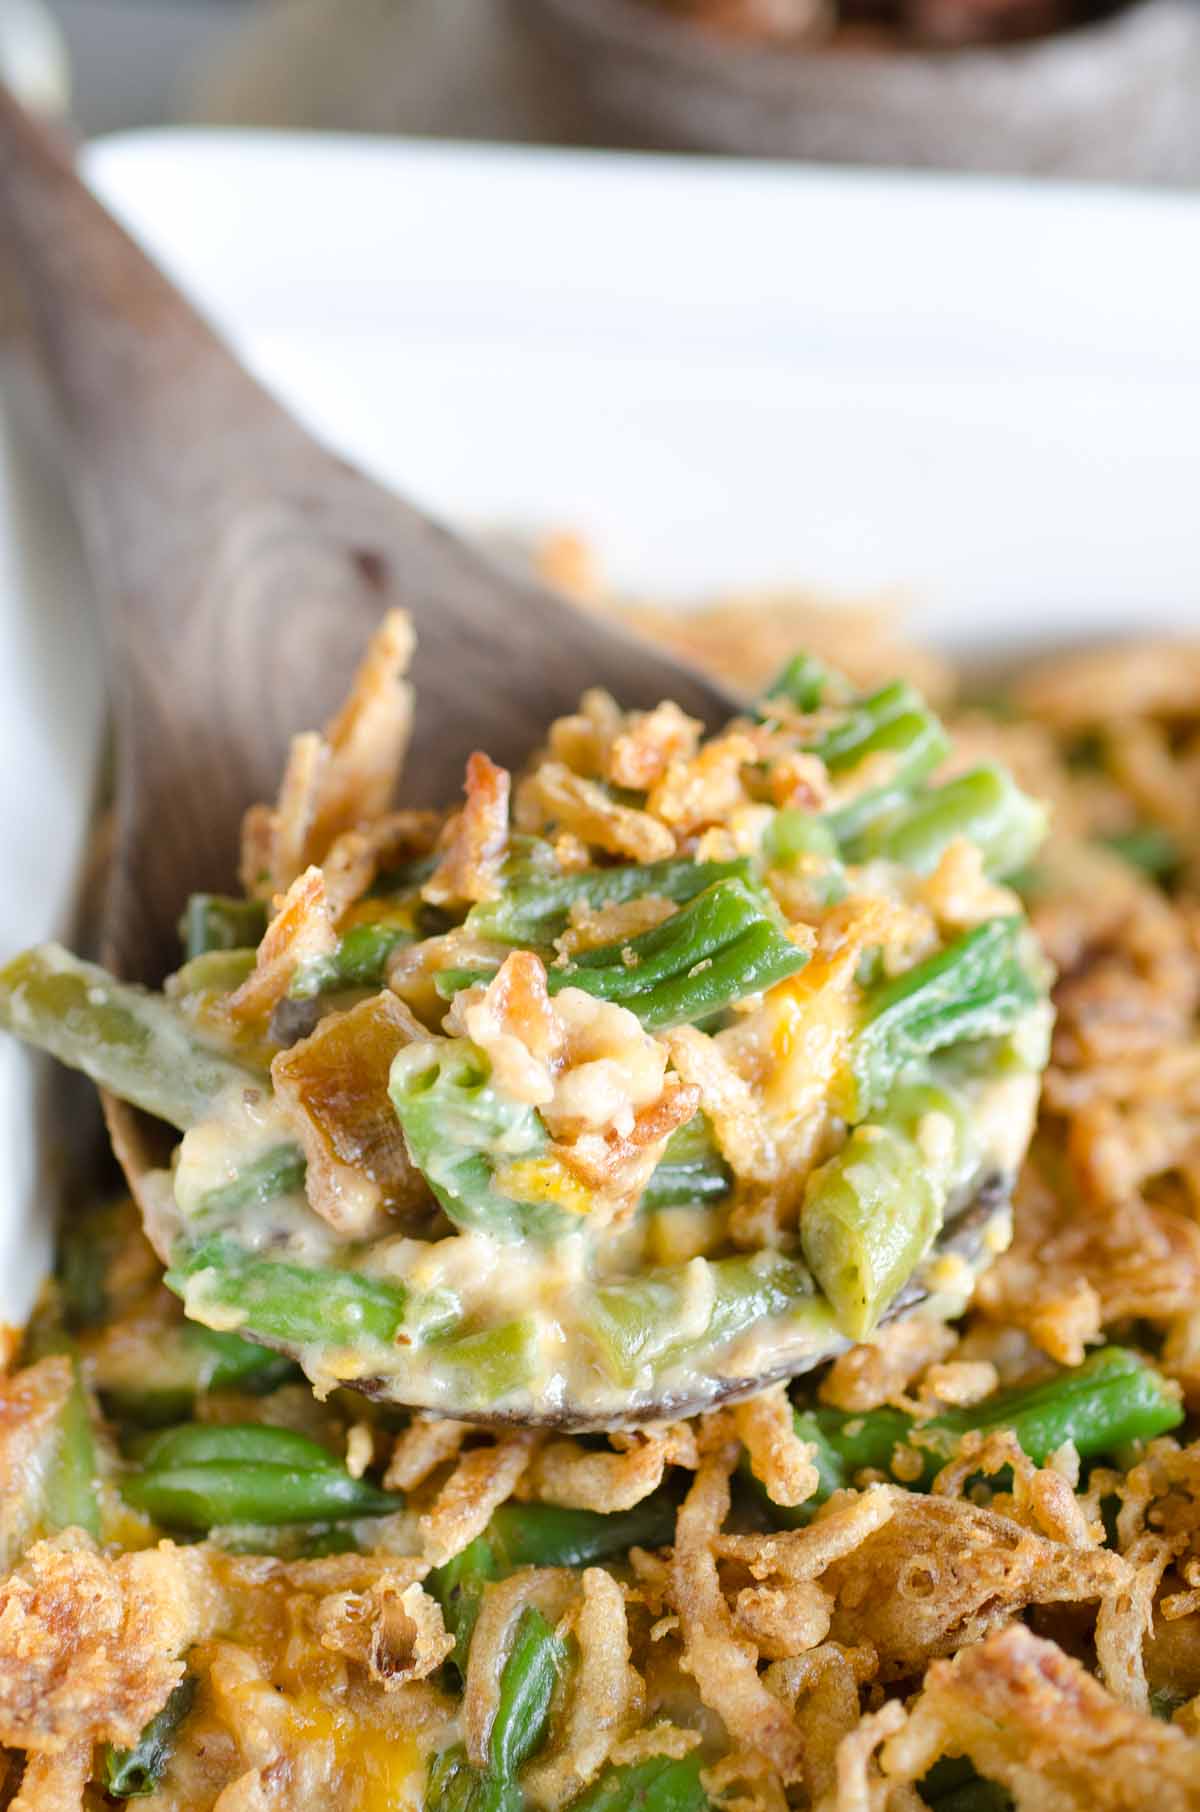 how to make green bean casserole without onions